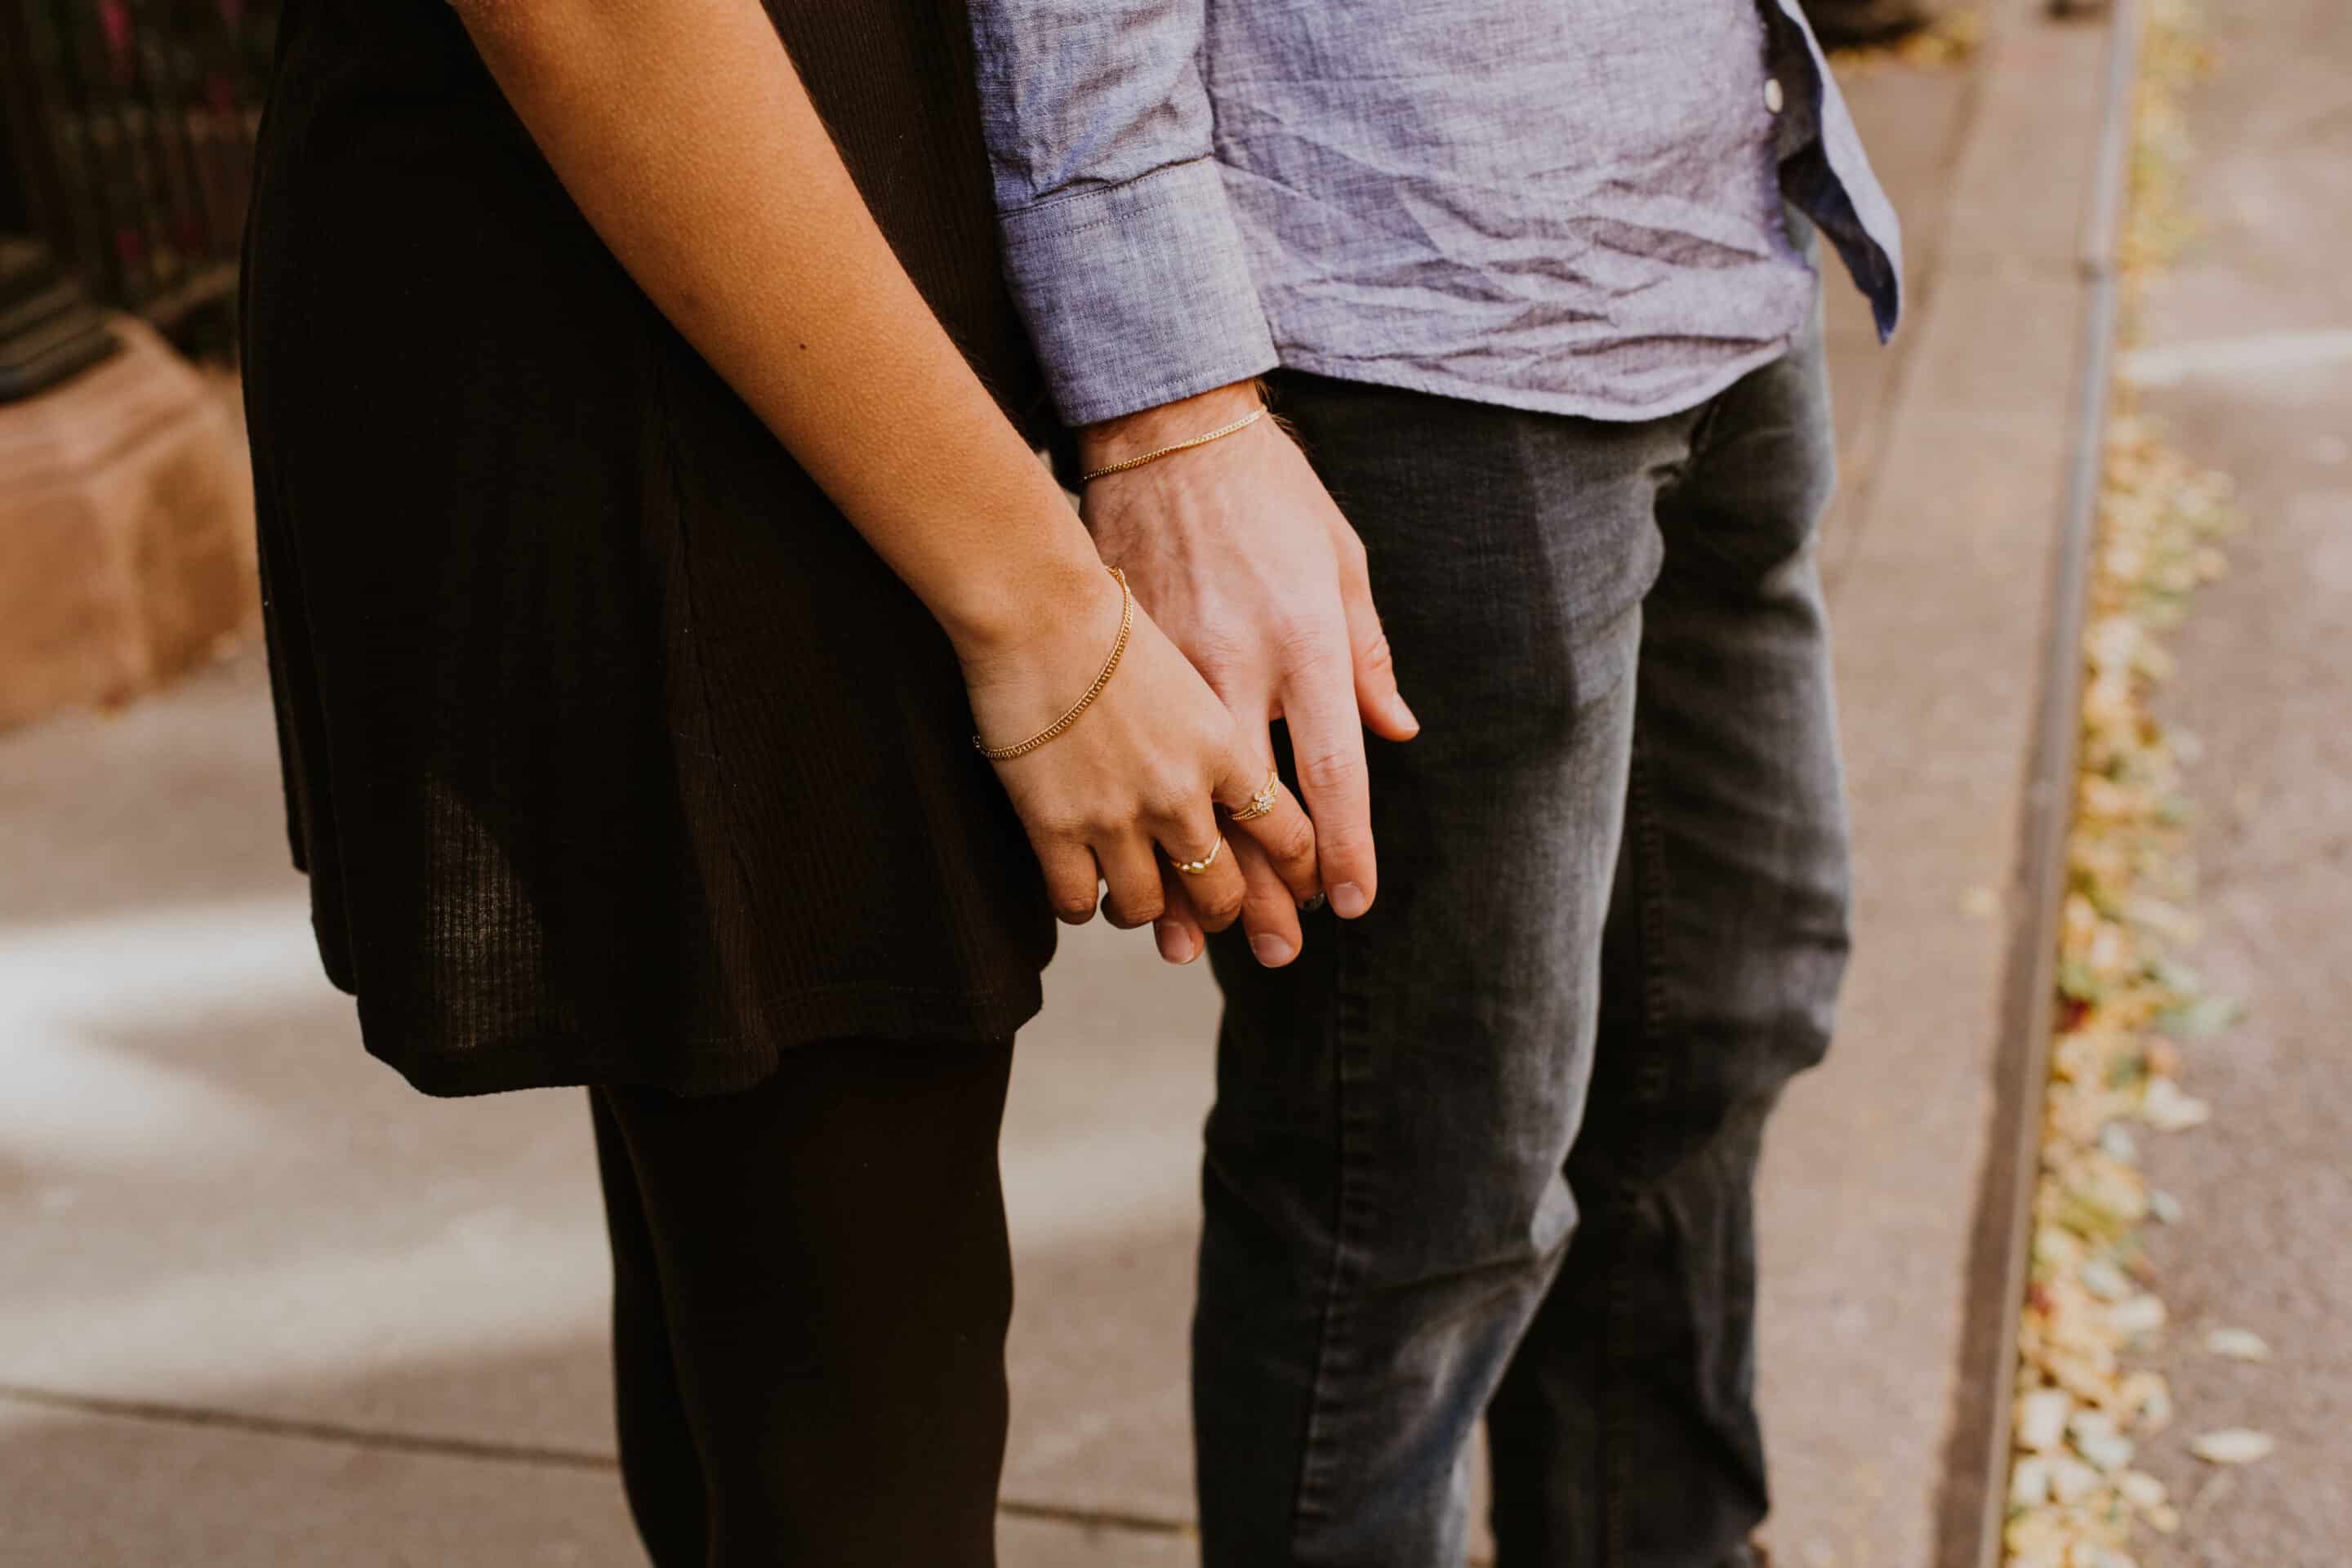 How Far Is Too Far In A Christian Dating Relationship - What Do You Consider Too Far In A Christian Relationship Christiandating : We're laying down some practical wisdom.